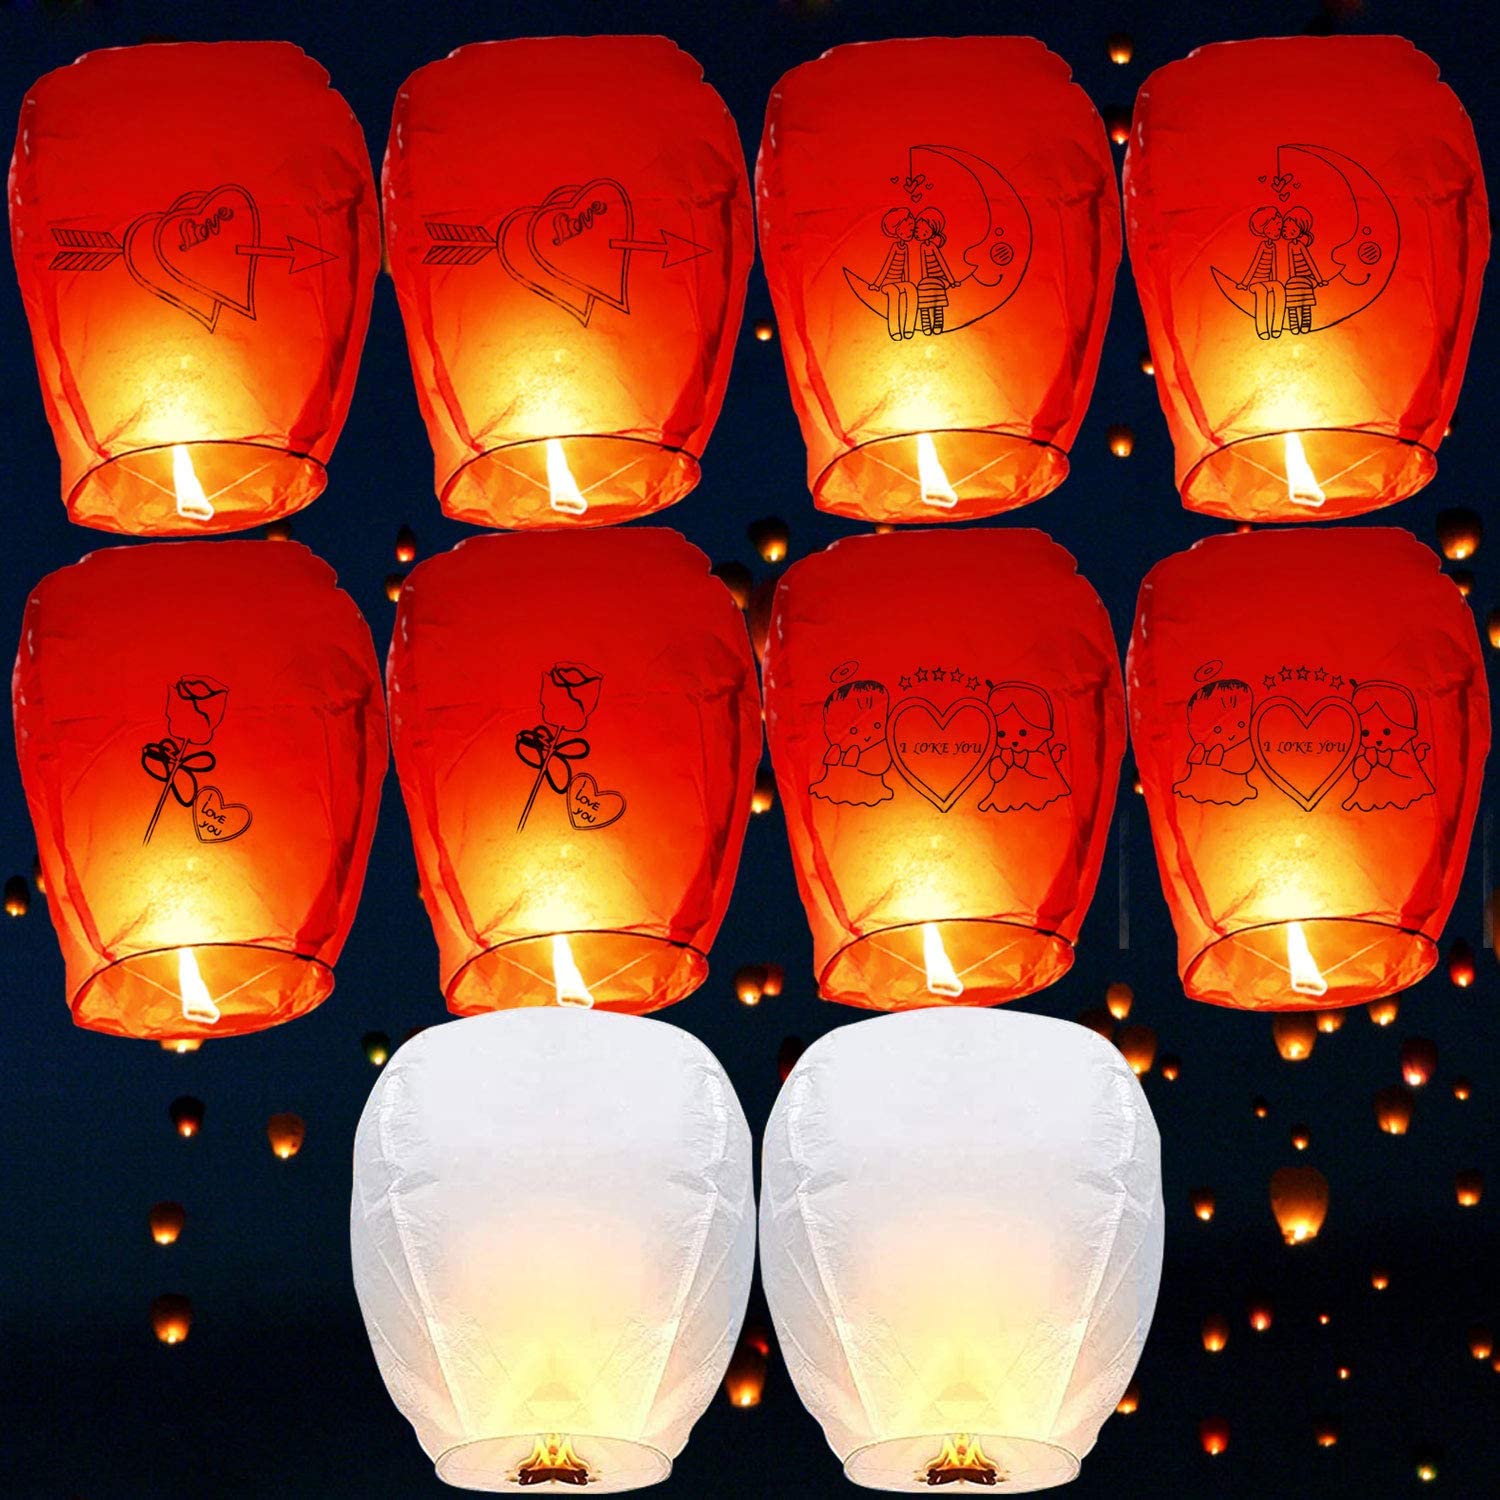 red, L Flame-Retardant Materials Red 100% Biodegradable Eco Friendly ZZCDDZ 10 Pack Chinese Sky Lanterns for Christmas New Years Eve Wish Party &Weddings